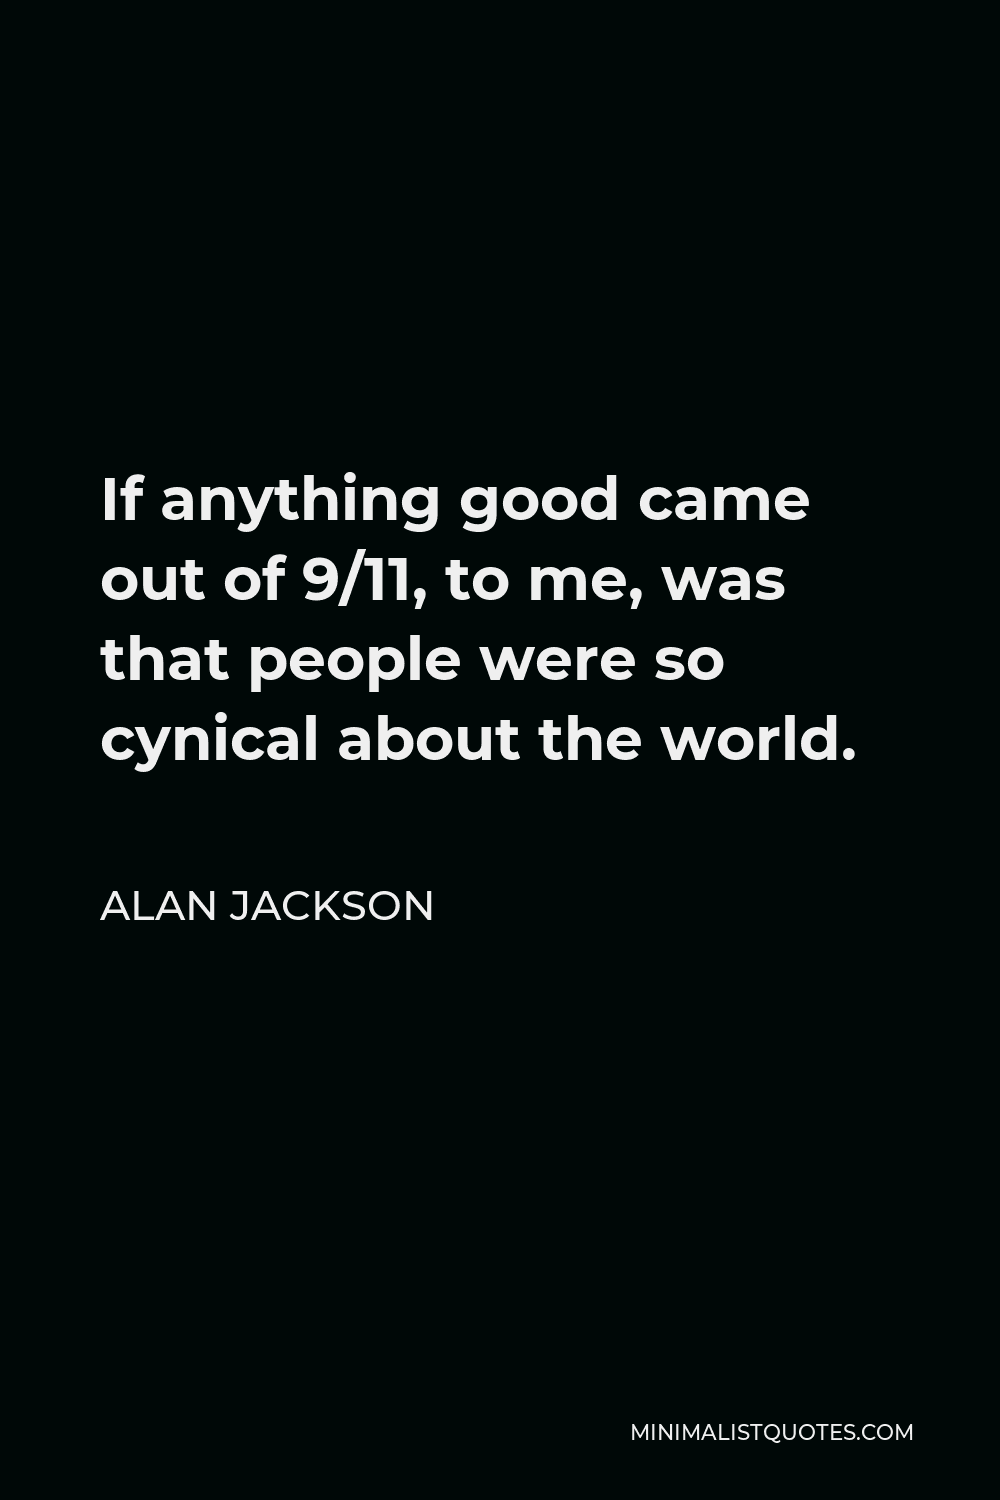 Alan Jackson Quote - If anything good came out of 9/11, to me, was that people were so cynical about the world.